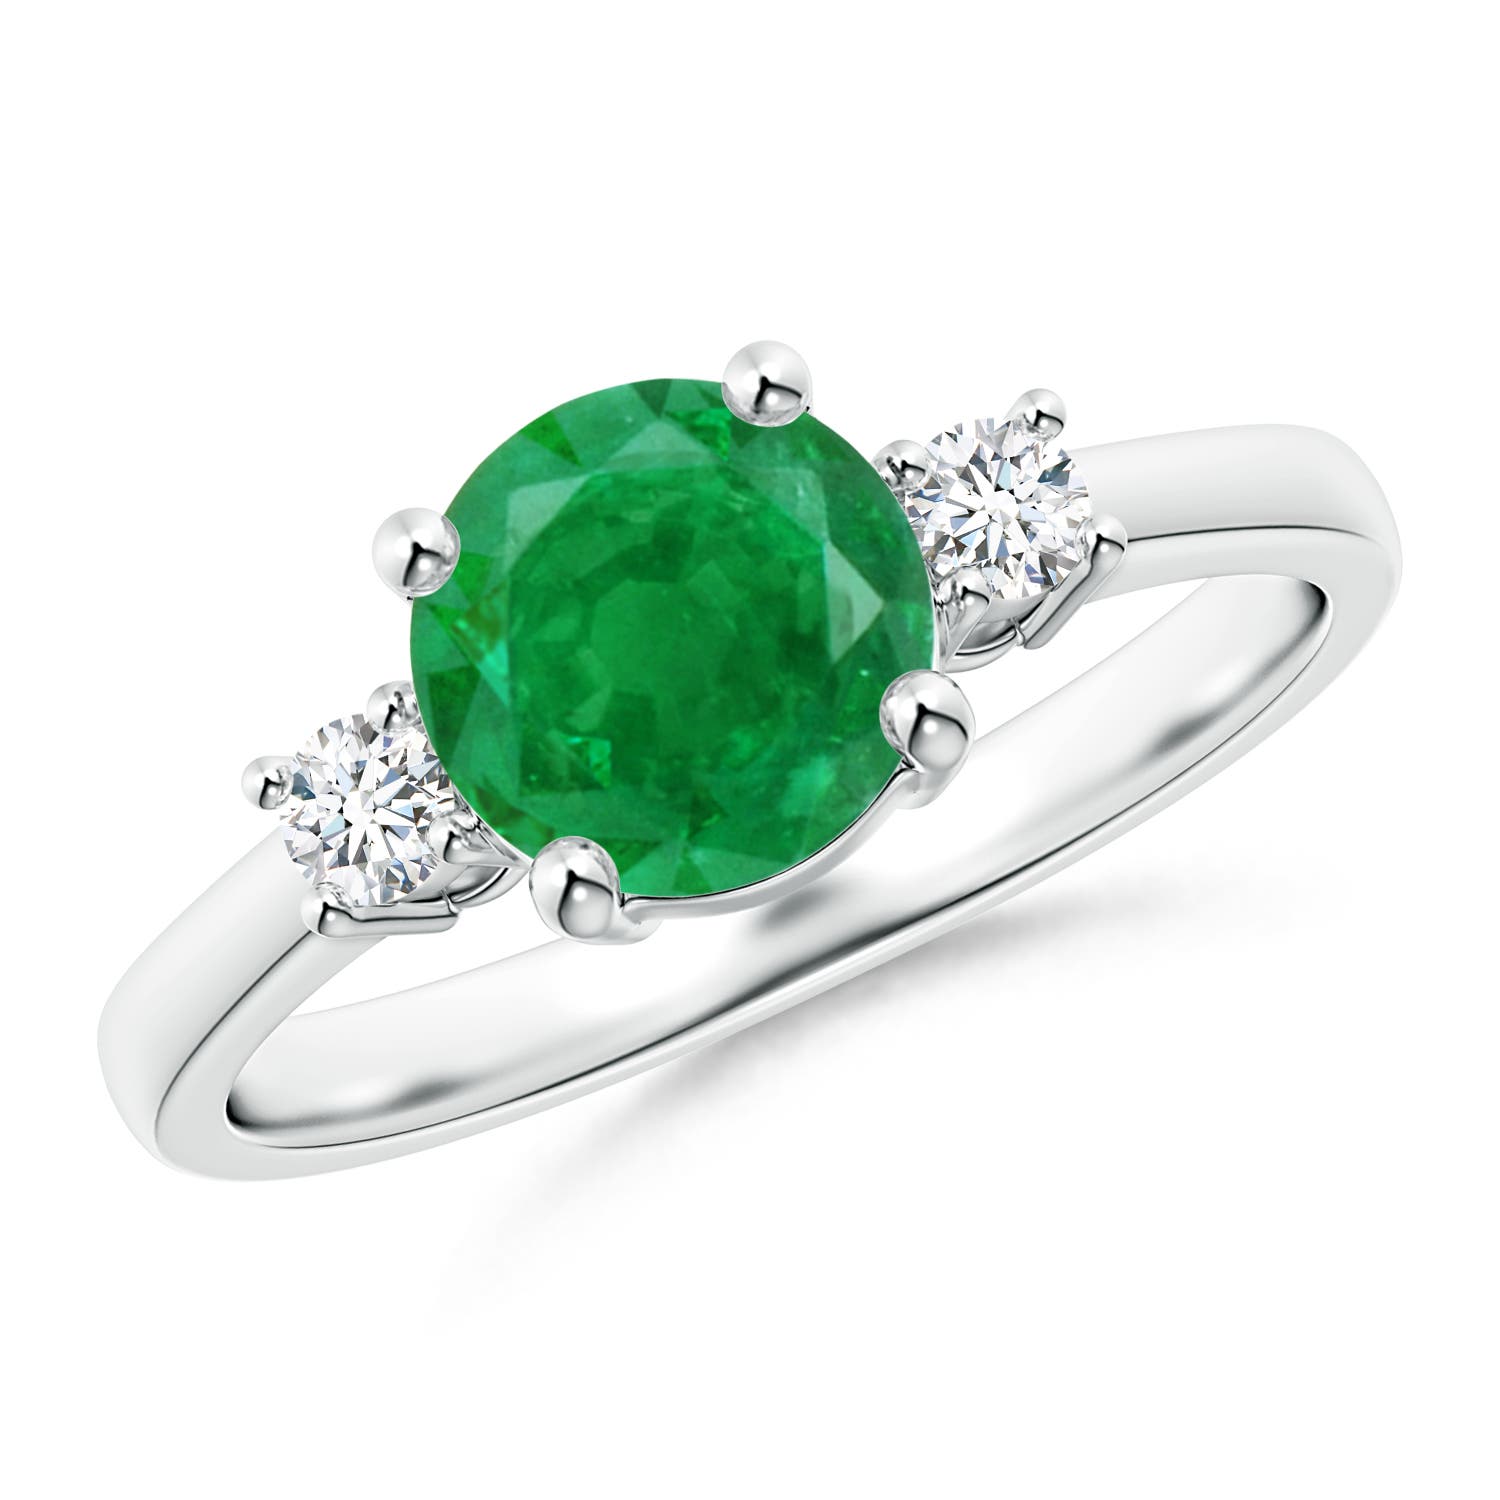 AA - Emerald / 1.35 CT / 14 KT White Gold